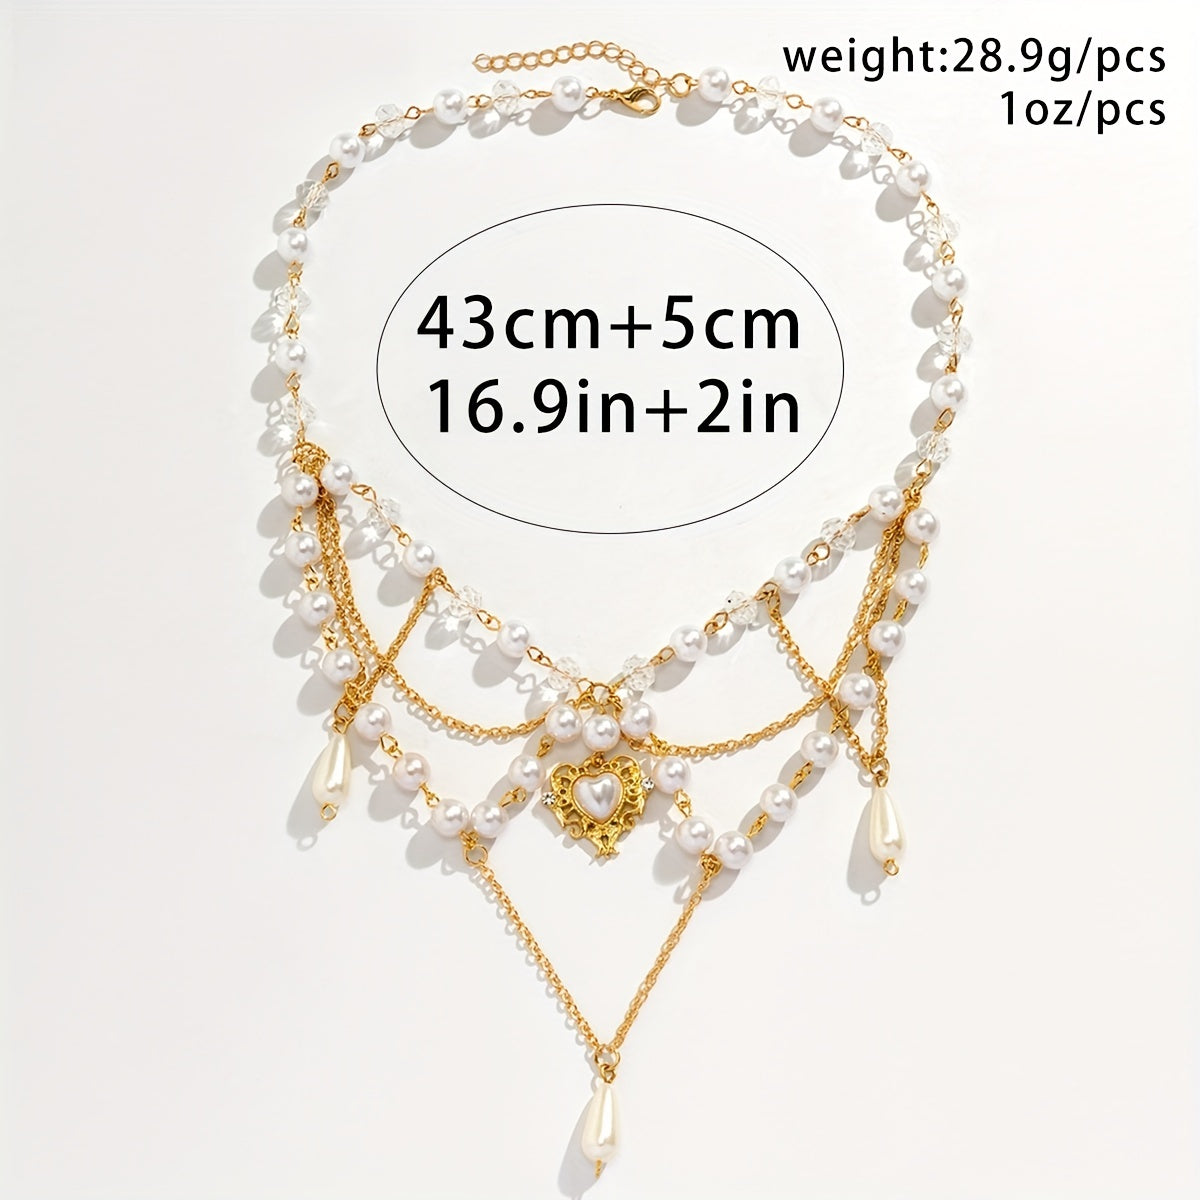 Baroque Vintage Multilayer Tassel Crystal Hollow Love Heart Pendant With Teardrop Shape Faux Pearl Necklace, Women's Holiday Accessories